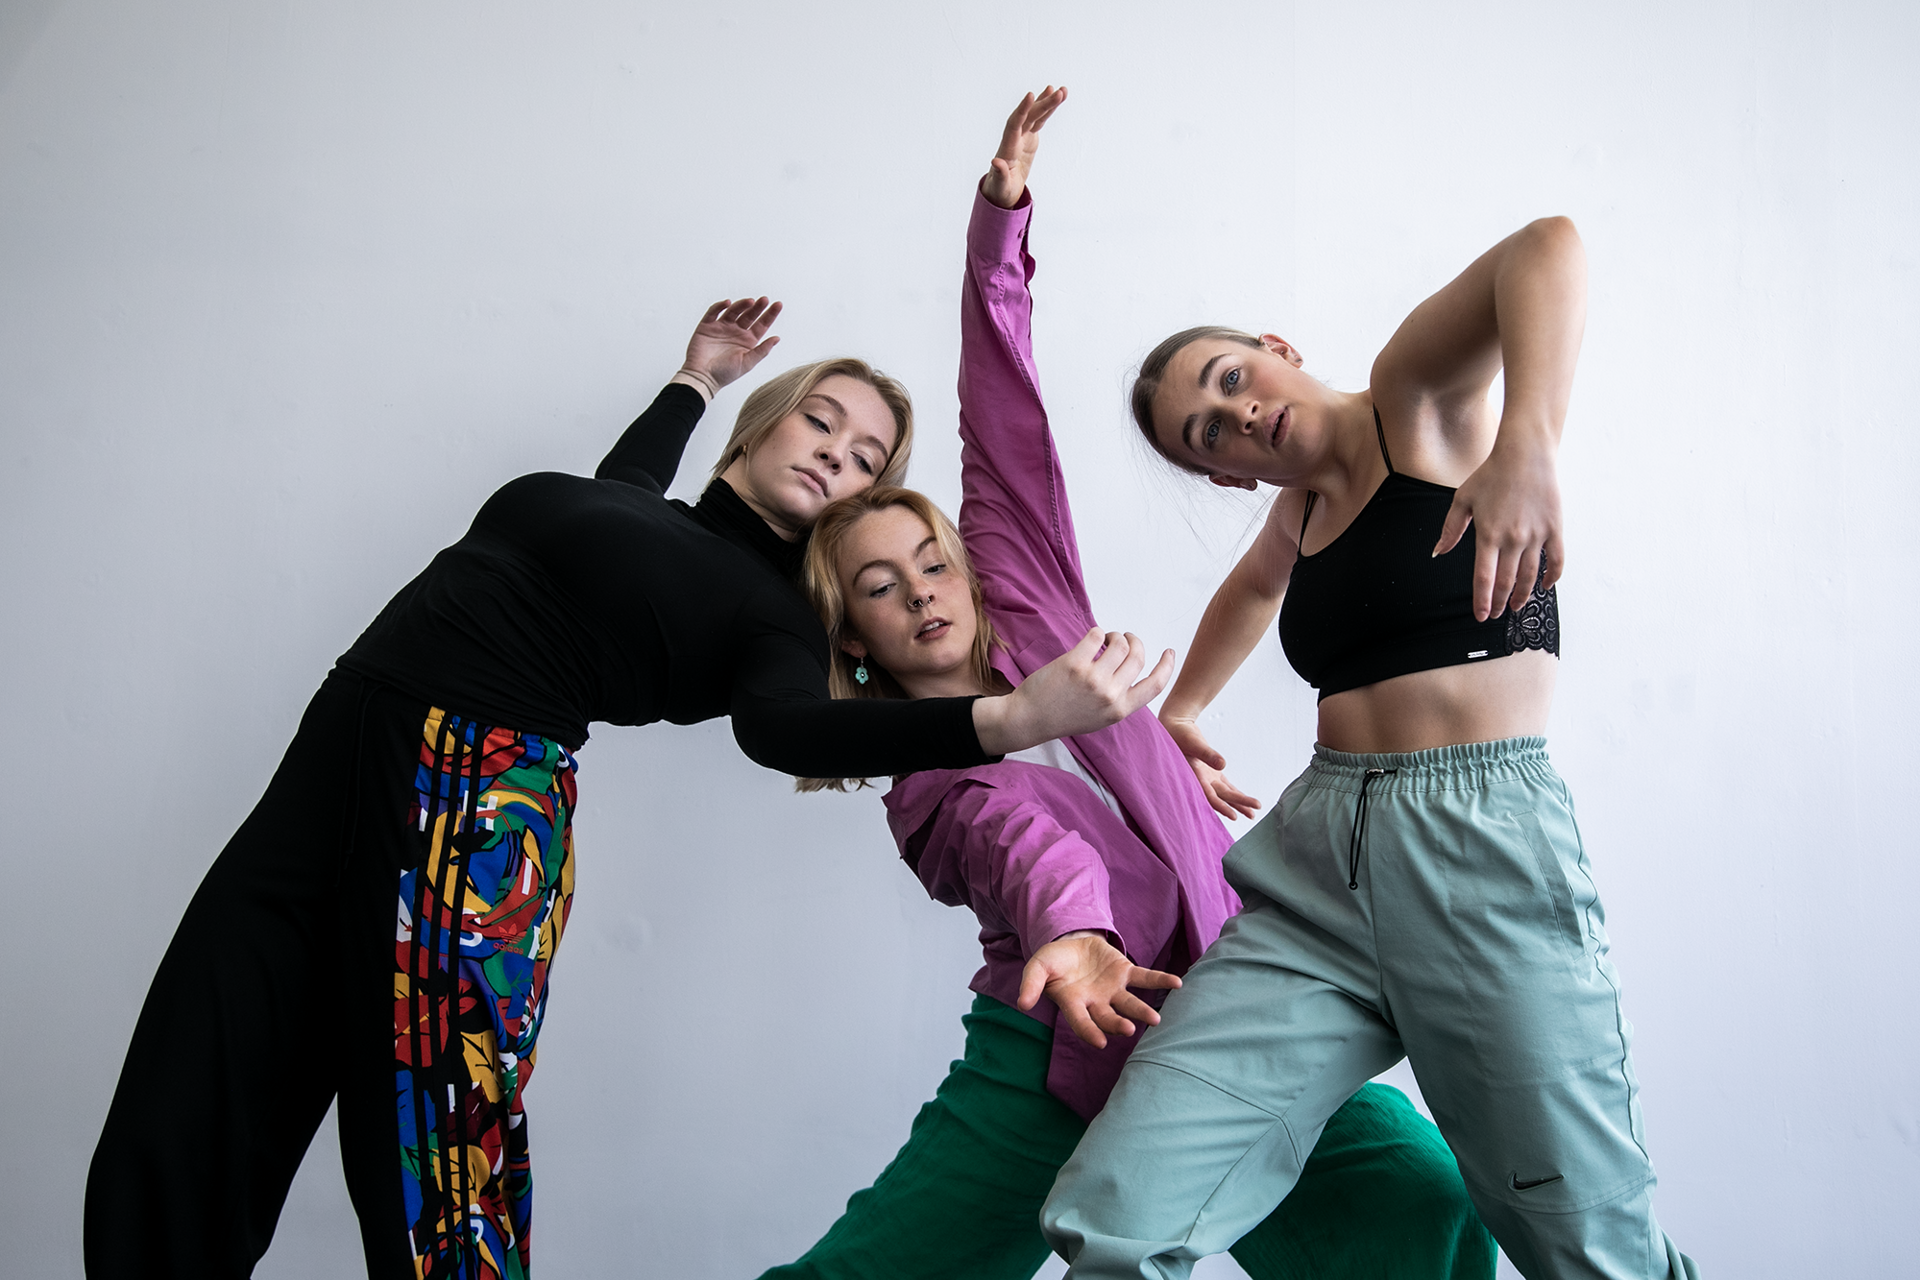 three white female dancers moving together with arms up in the air. Wearing colourful outfits against a white wall